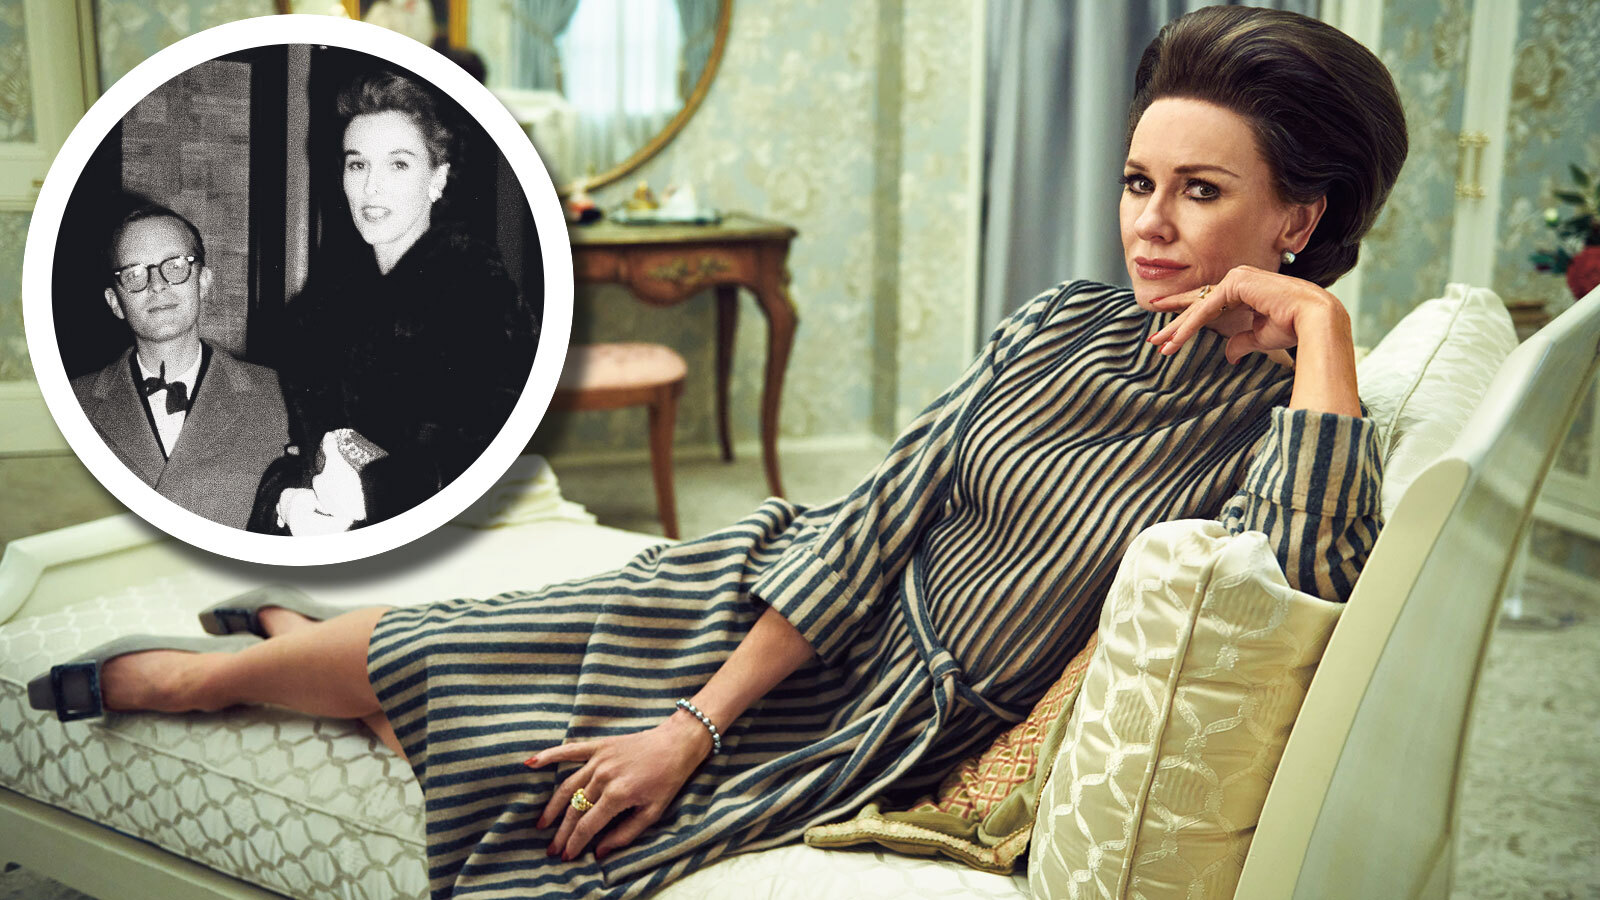 Truman Capote and Babe Paley — the society beauty he betrayed